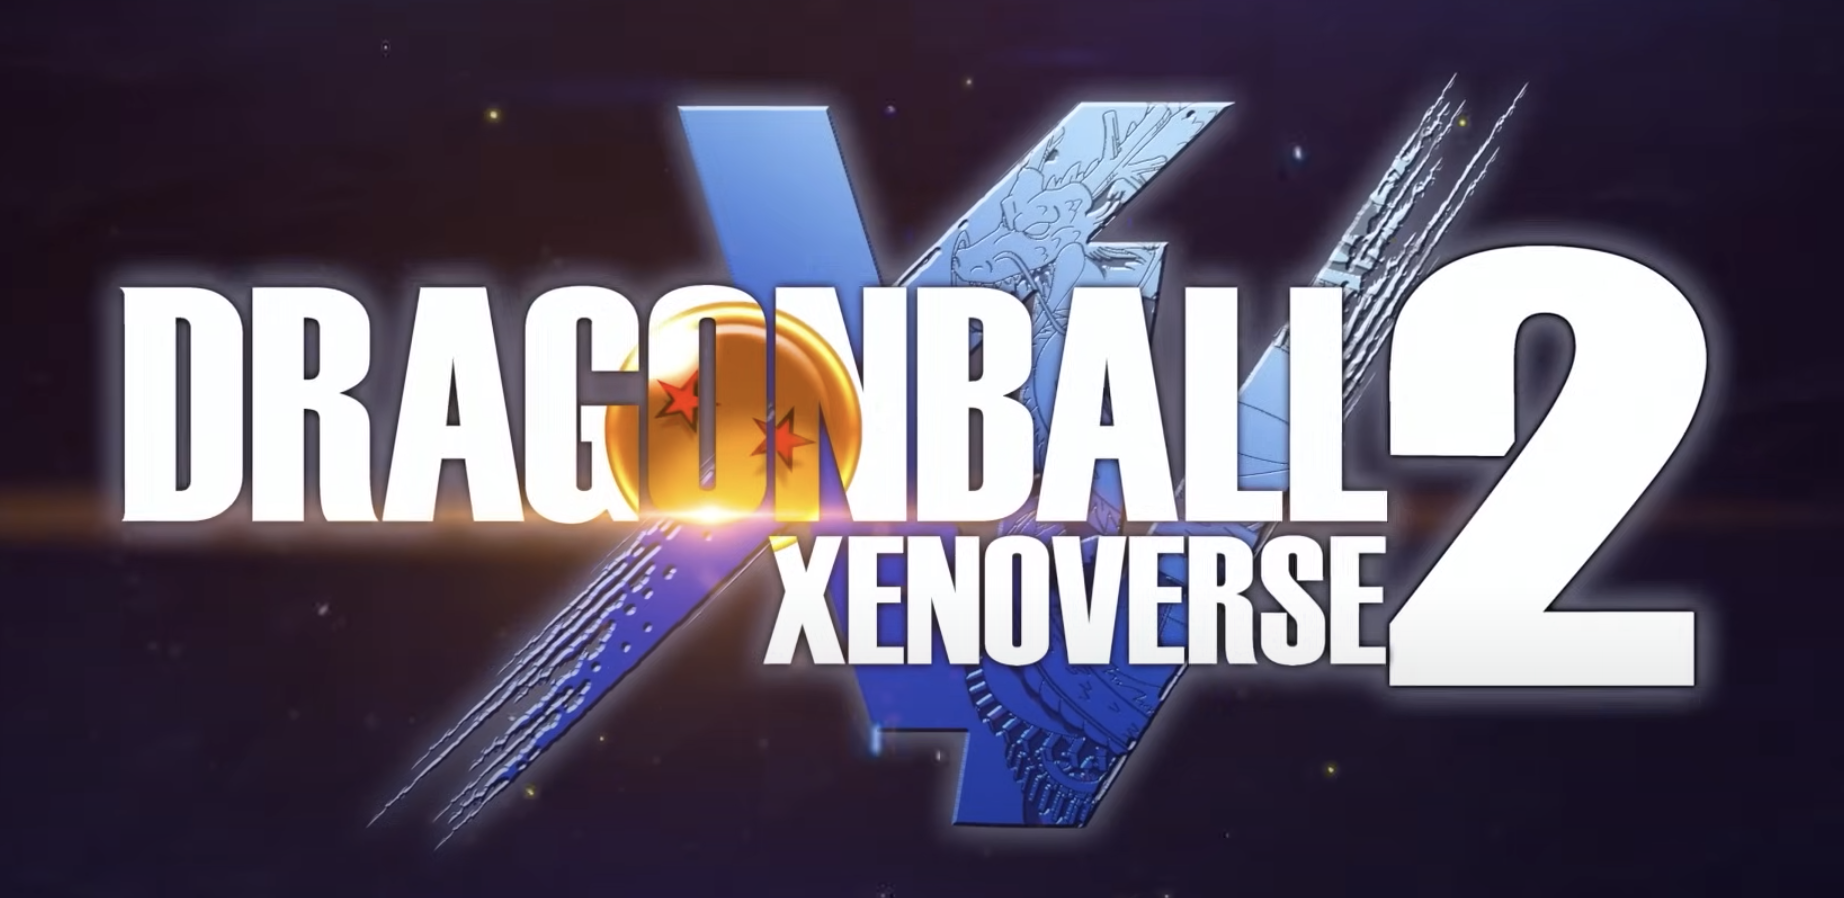 Unique addition to Xenoverse 2 – Northern Star